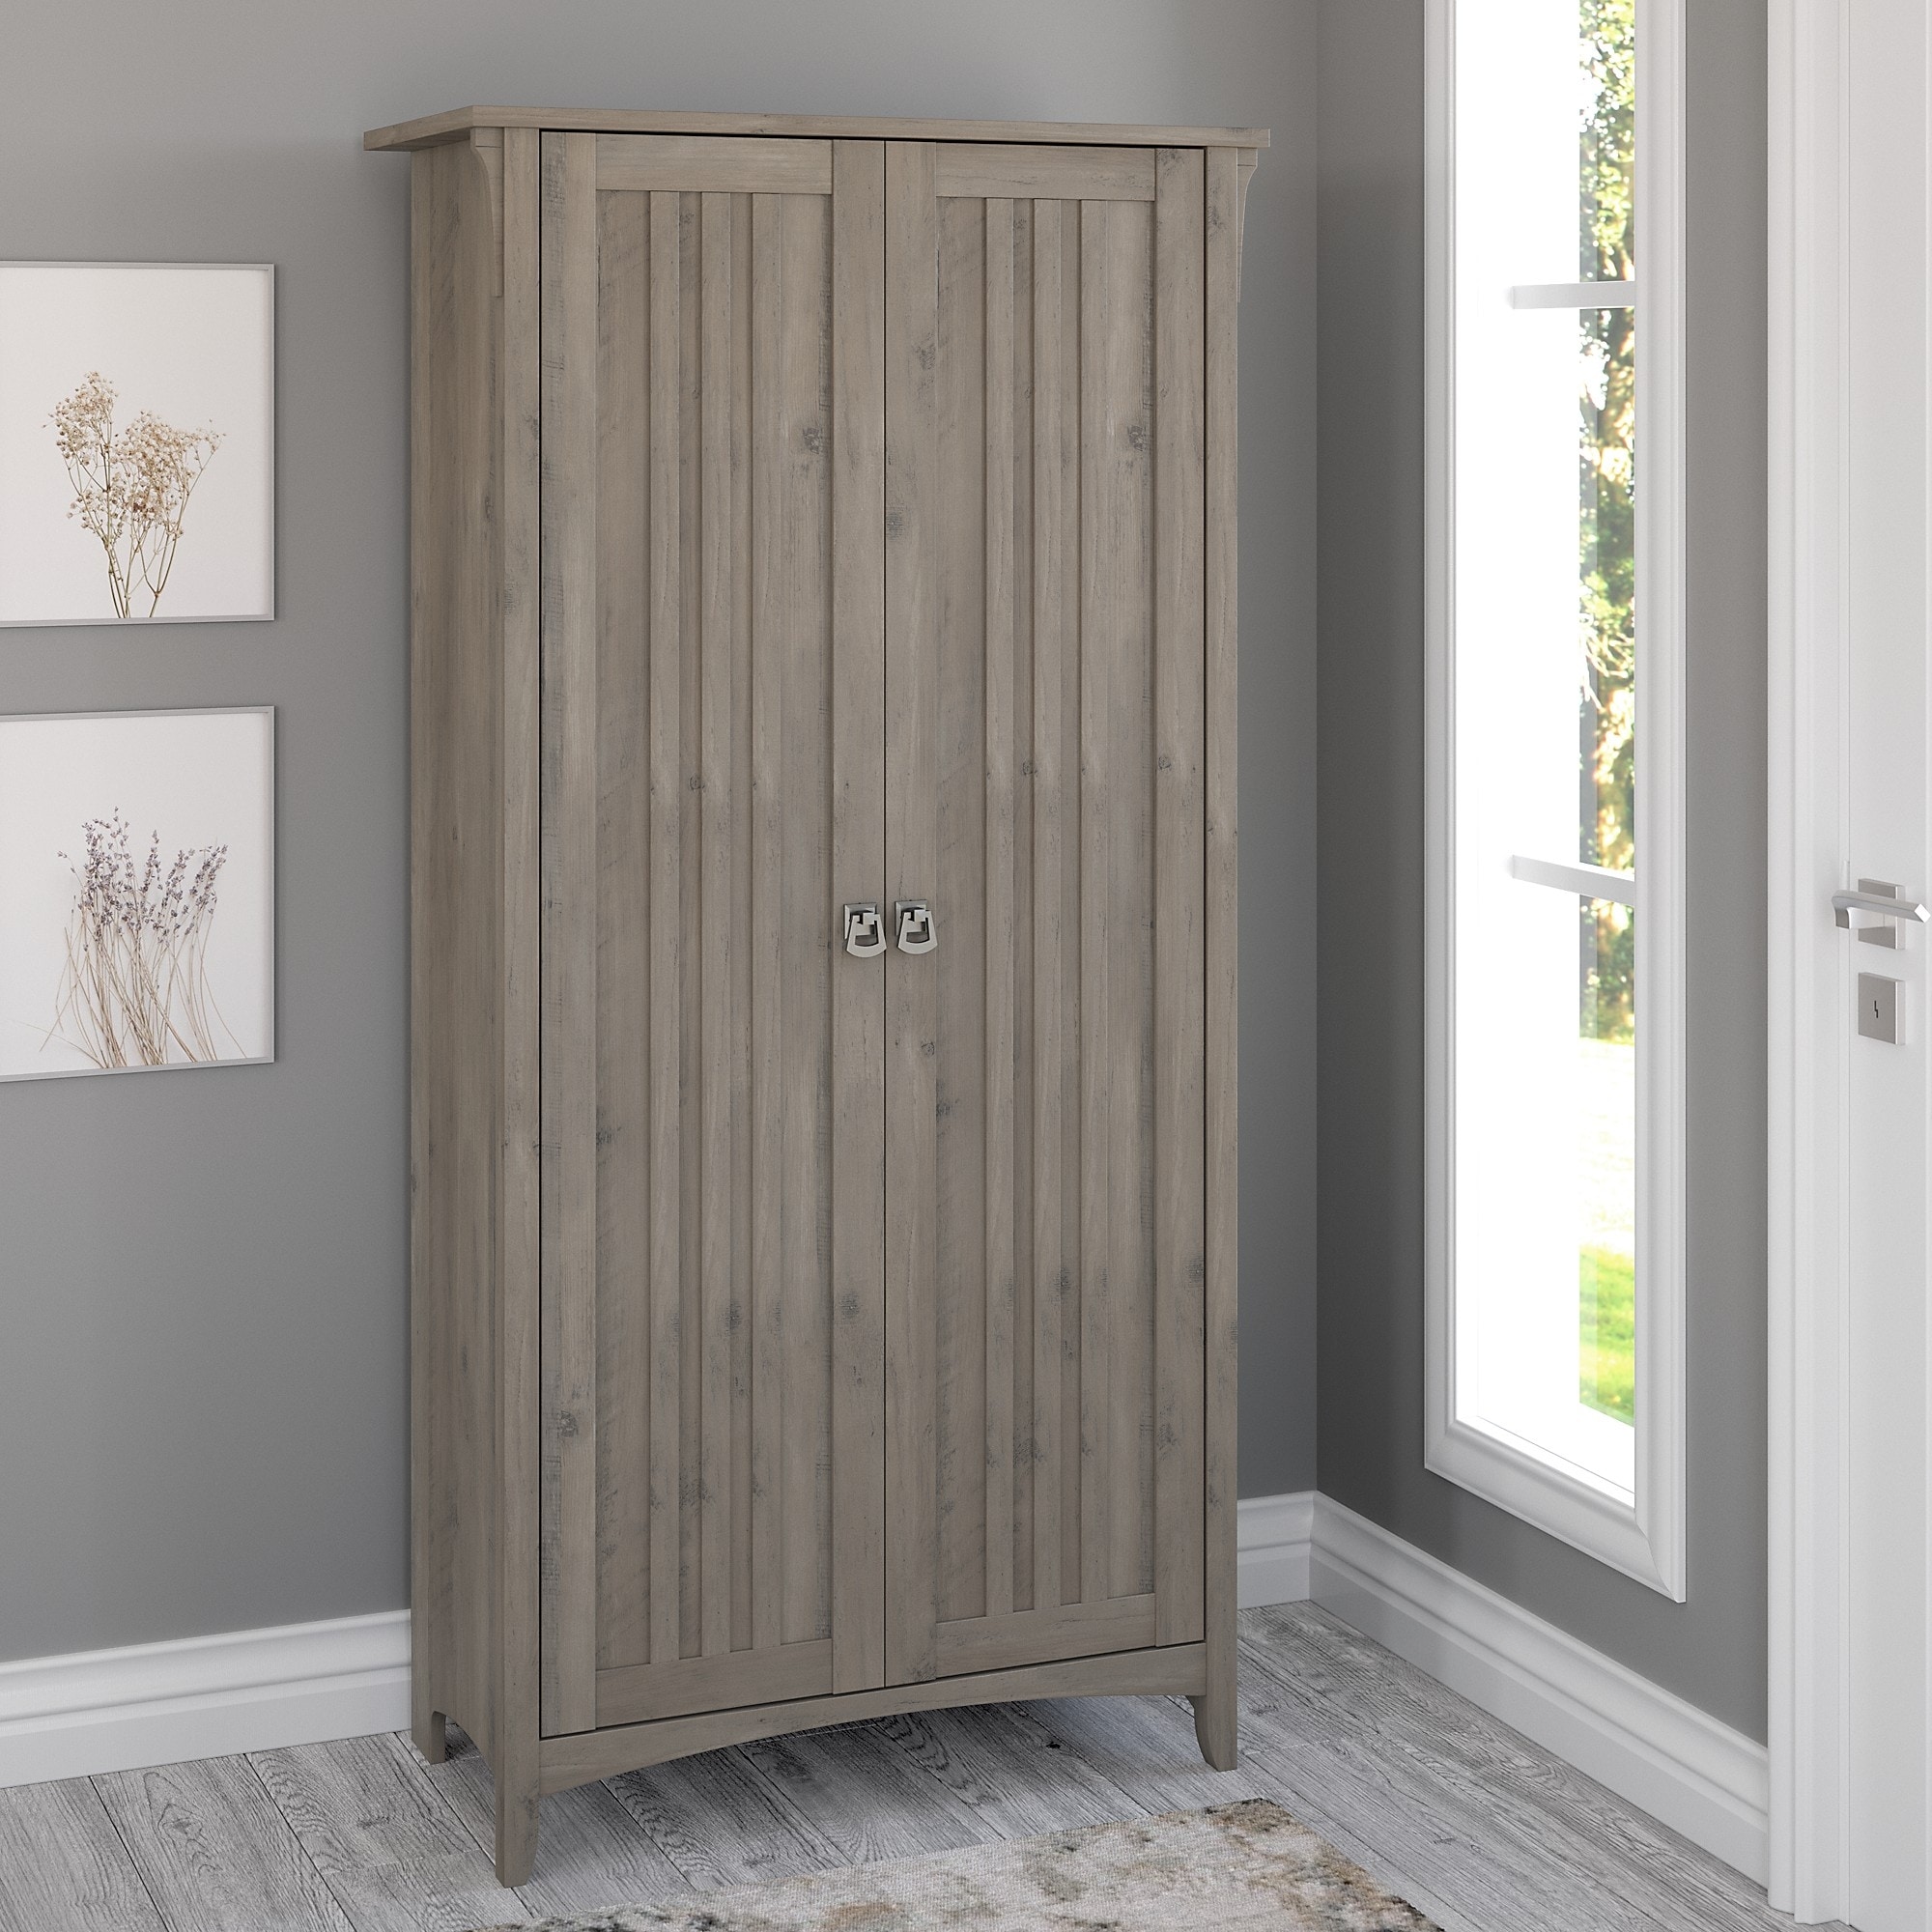 https://ak1.ostkcdn.com/images/products/is/images/direct/231471e7a161503de48b3f1e3a89a6571f0ddbbf/Salinas-Tall-Storage-Cabinet-with-Doors.jpg